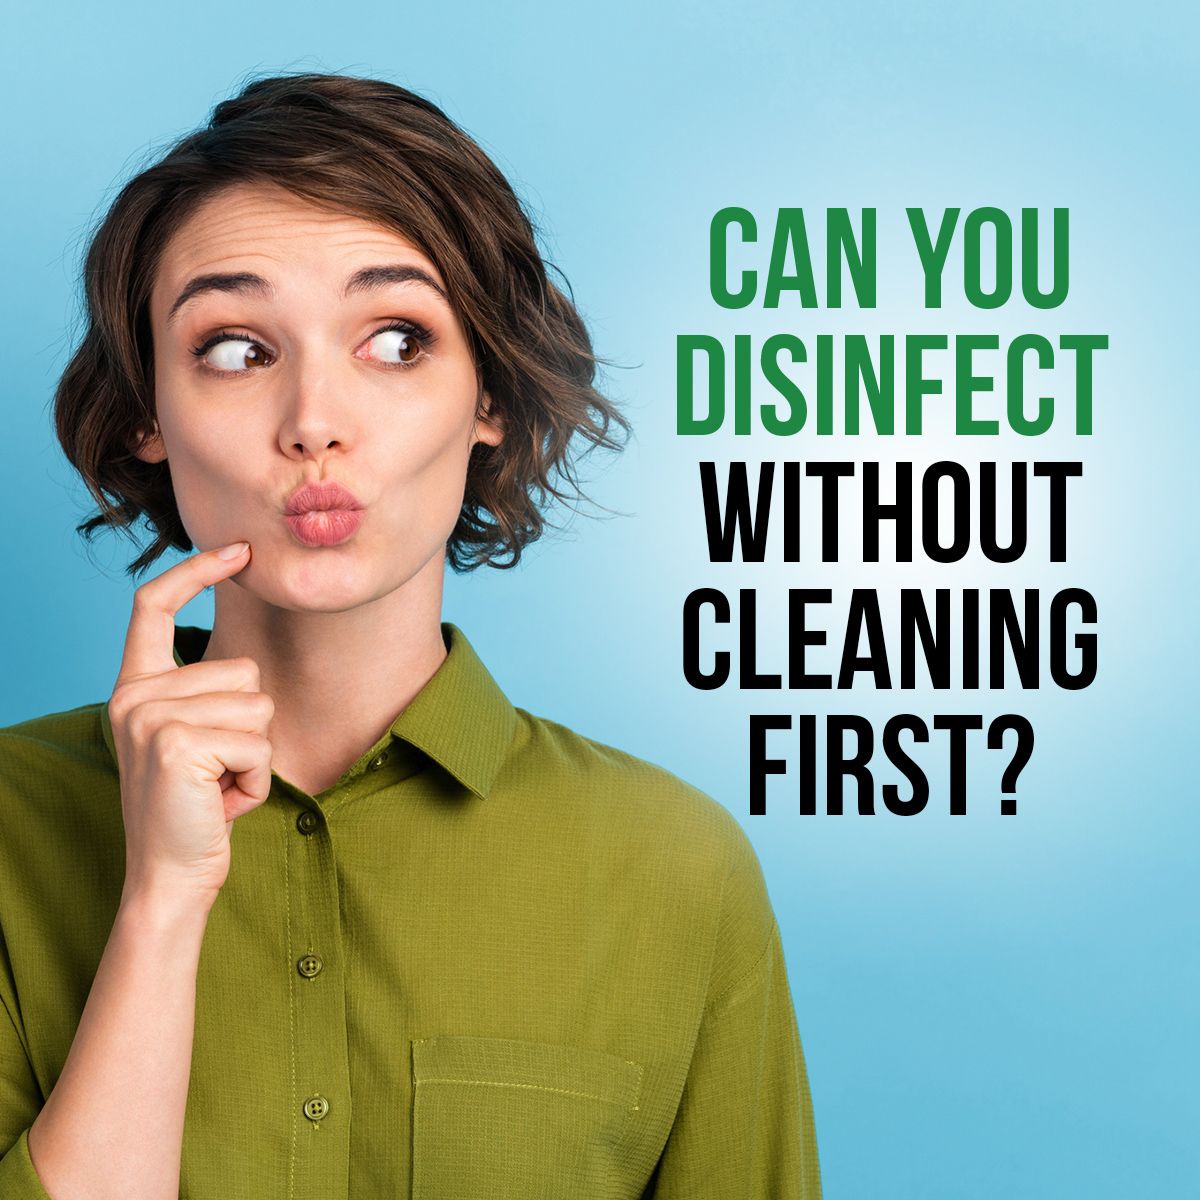 Can You Disinfect Without Cleaning First?